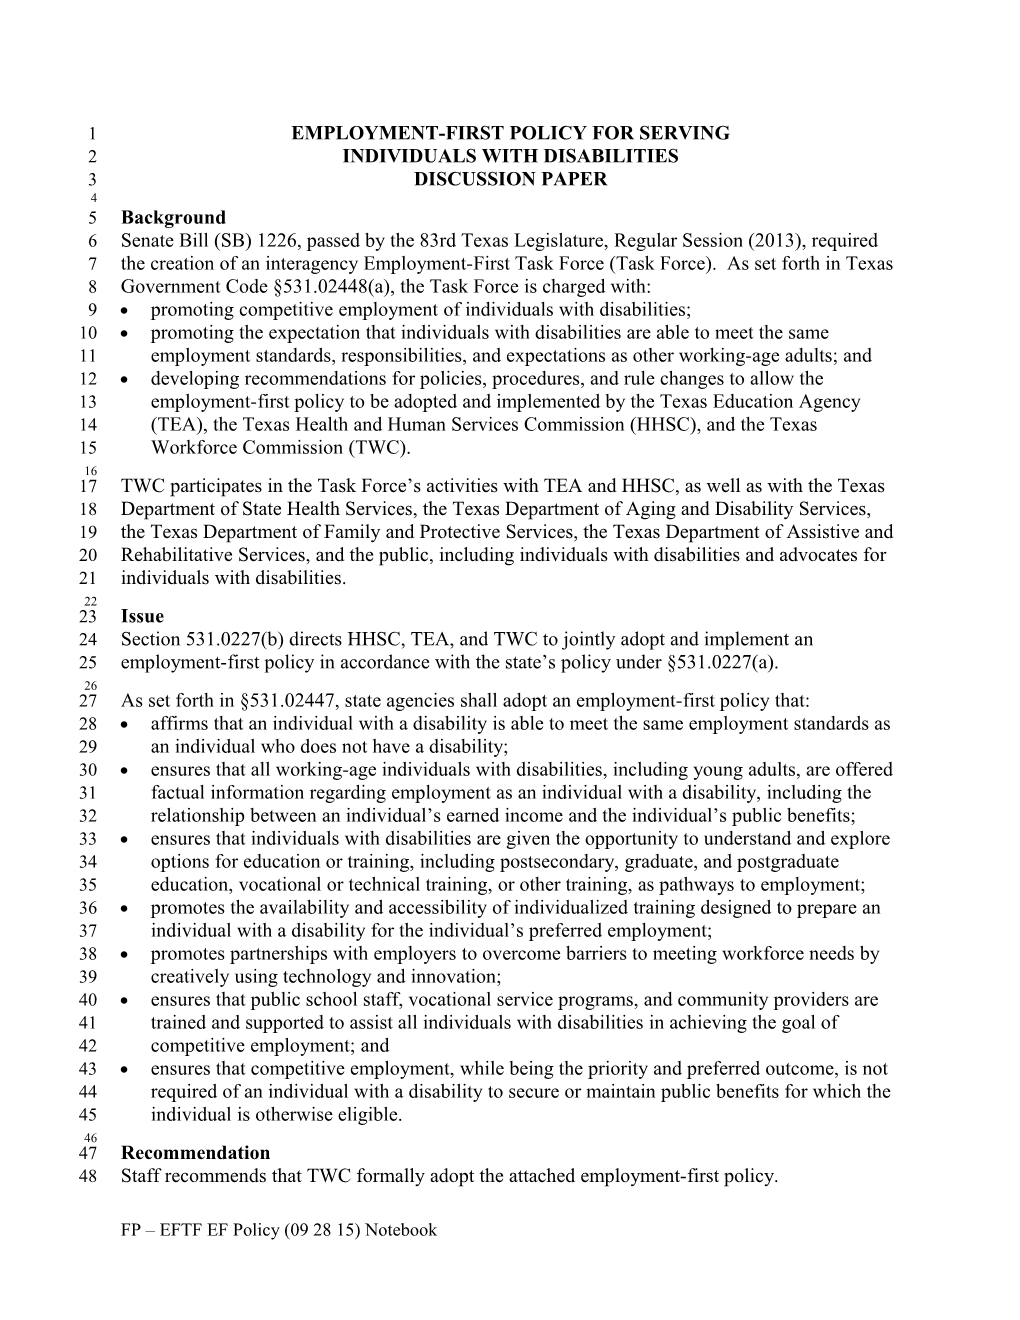 Commission Meeting Materials October 21, 2015 - Employment First Policy for Serving Individuals